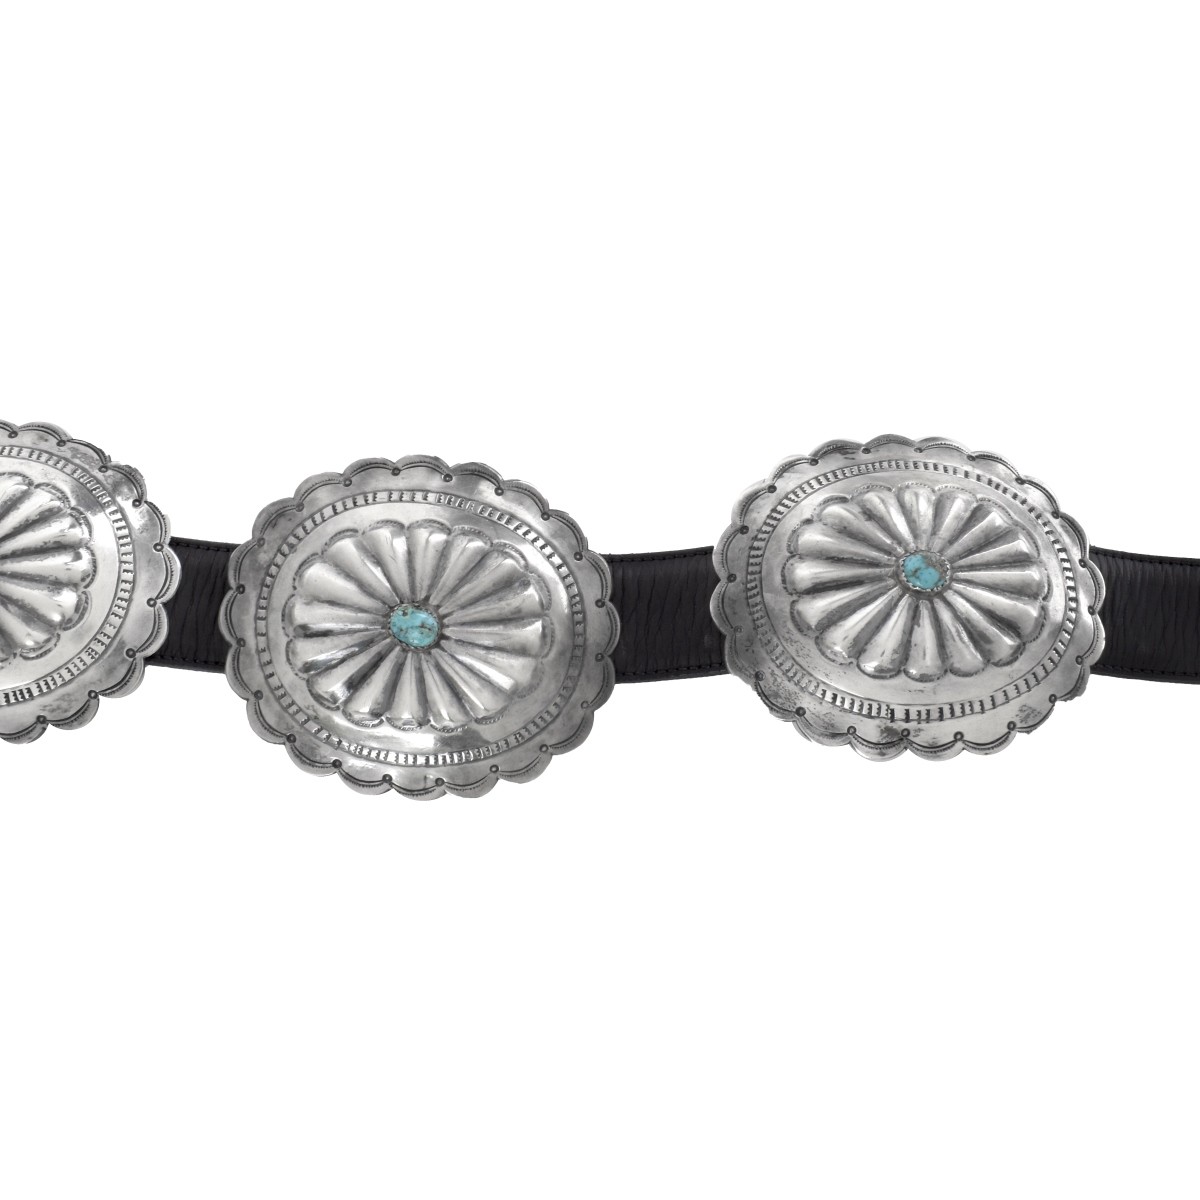 Navajo Silver and Turquoise Concho Belt